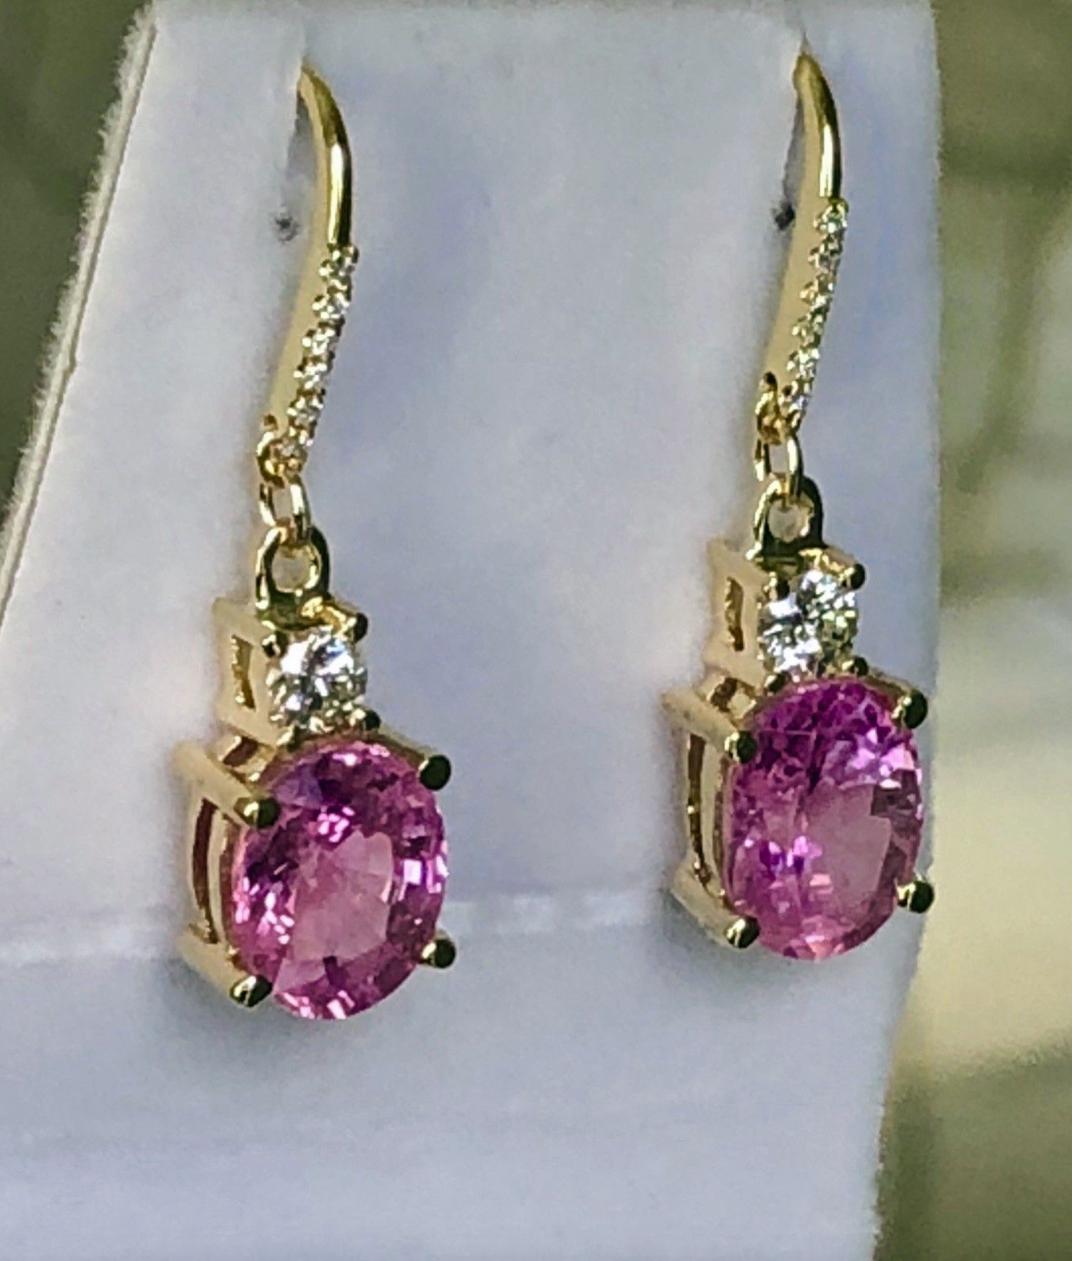 A brilliant pair of 18K yellow gold Natural Burmese Pink Sapphires and Diamond Drop Dangle Earrings.
The Earrings Featuring Two Pink Sapphire Weight Is 6.75 Carats (Sapphires Are Vivid Pink And Just Stunning!! Each Sapphire Is Approx. 3.38 Carats